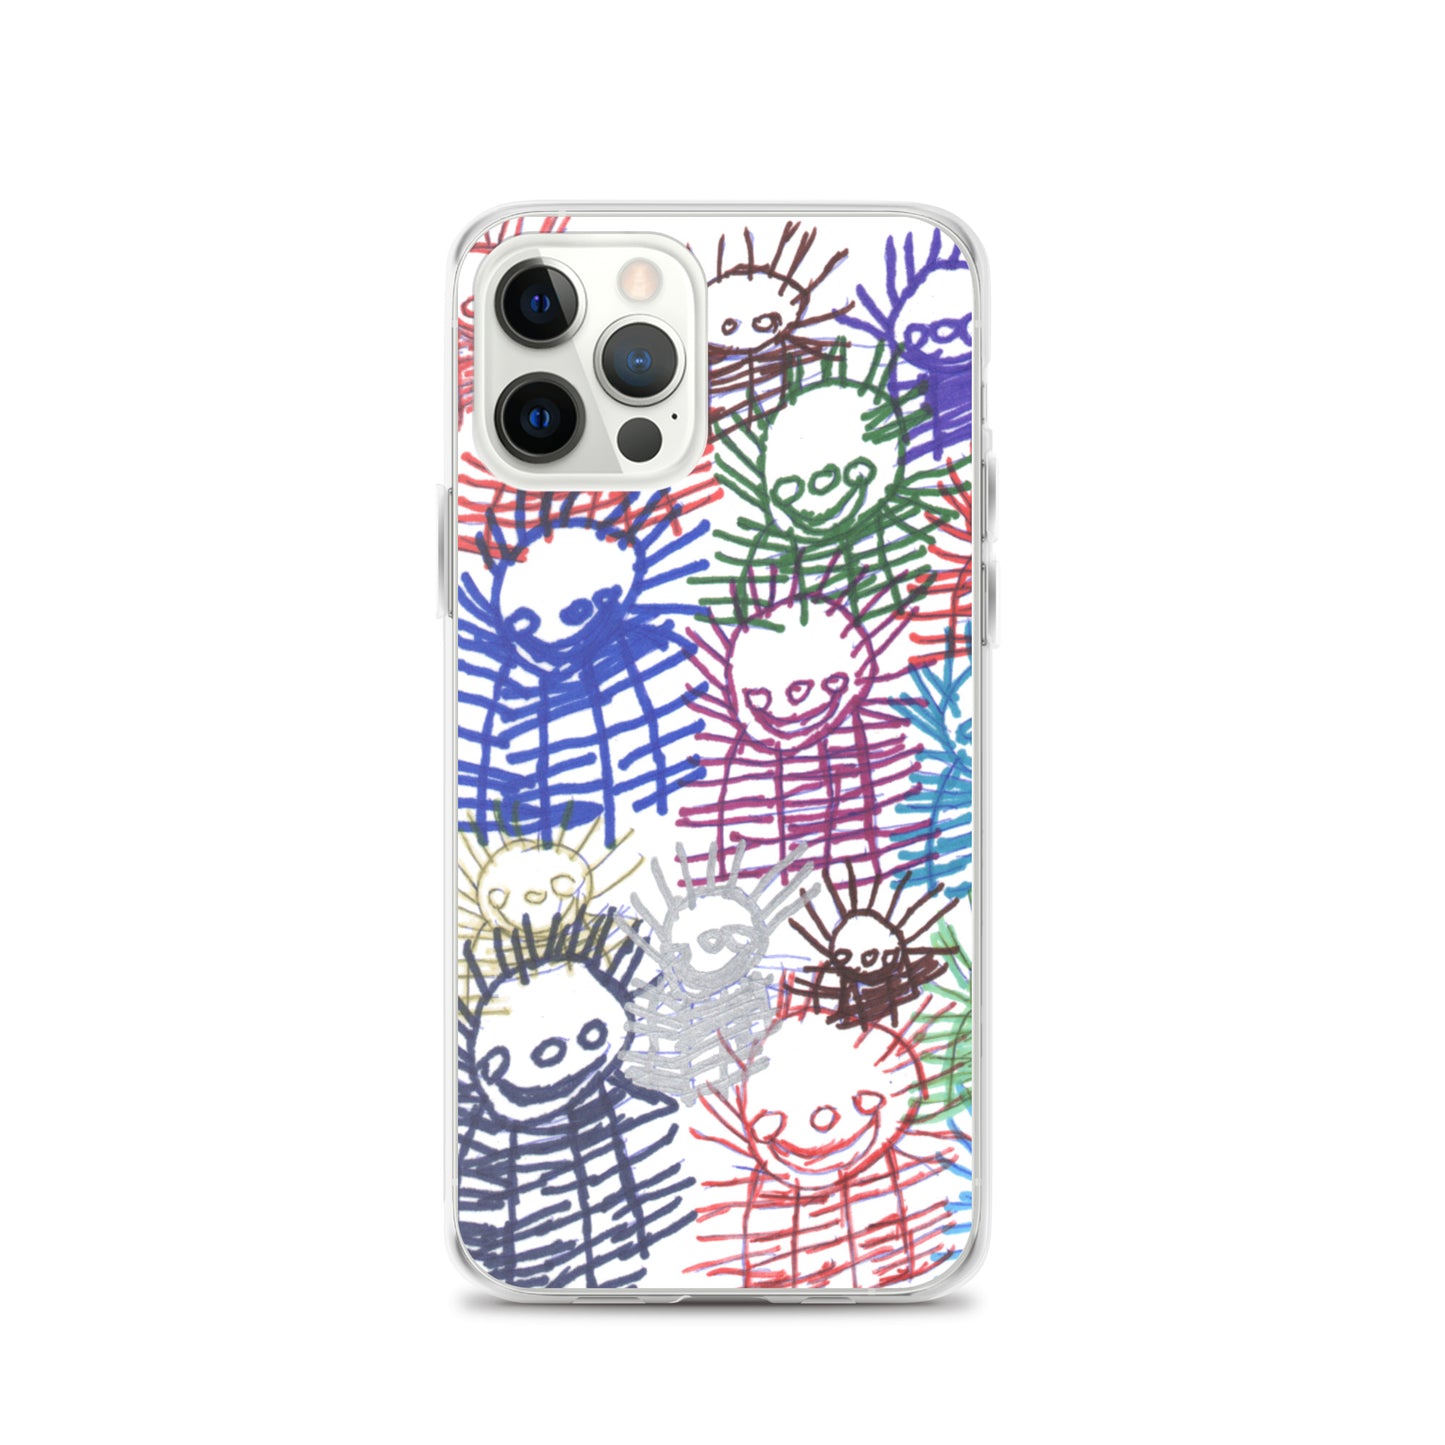 iPhone Case - "Pretty Flower's 60th Birthday Party"